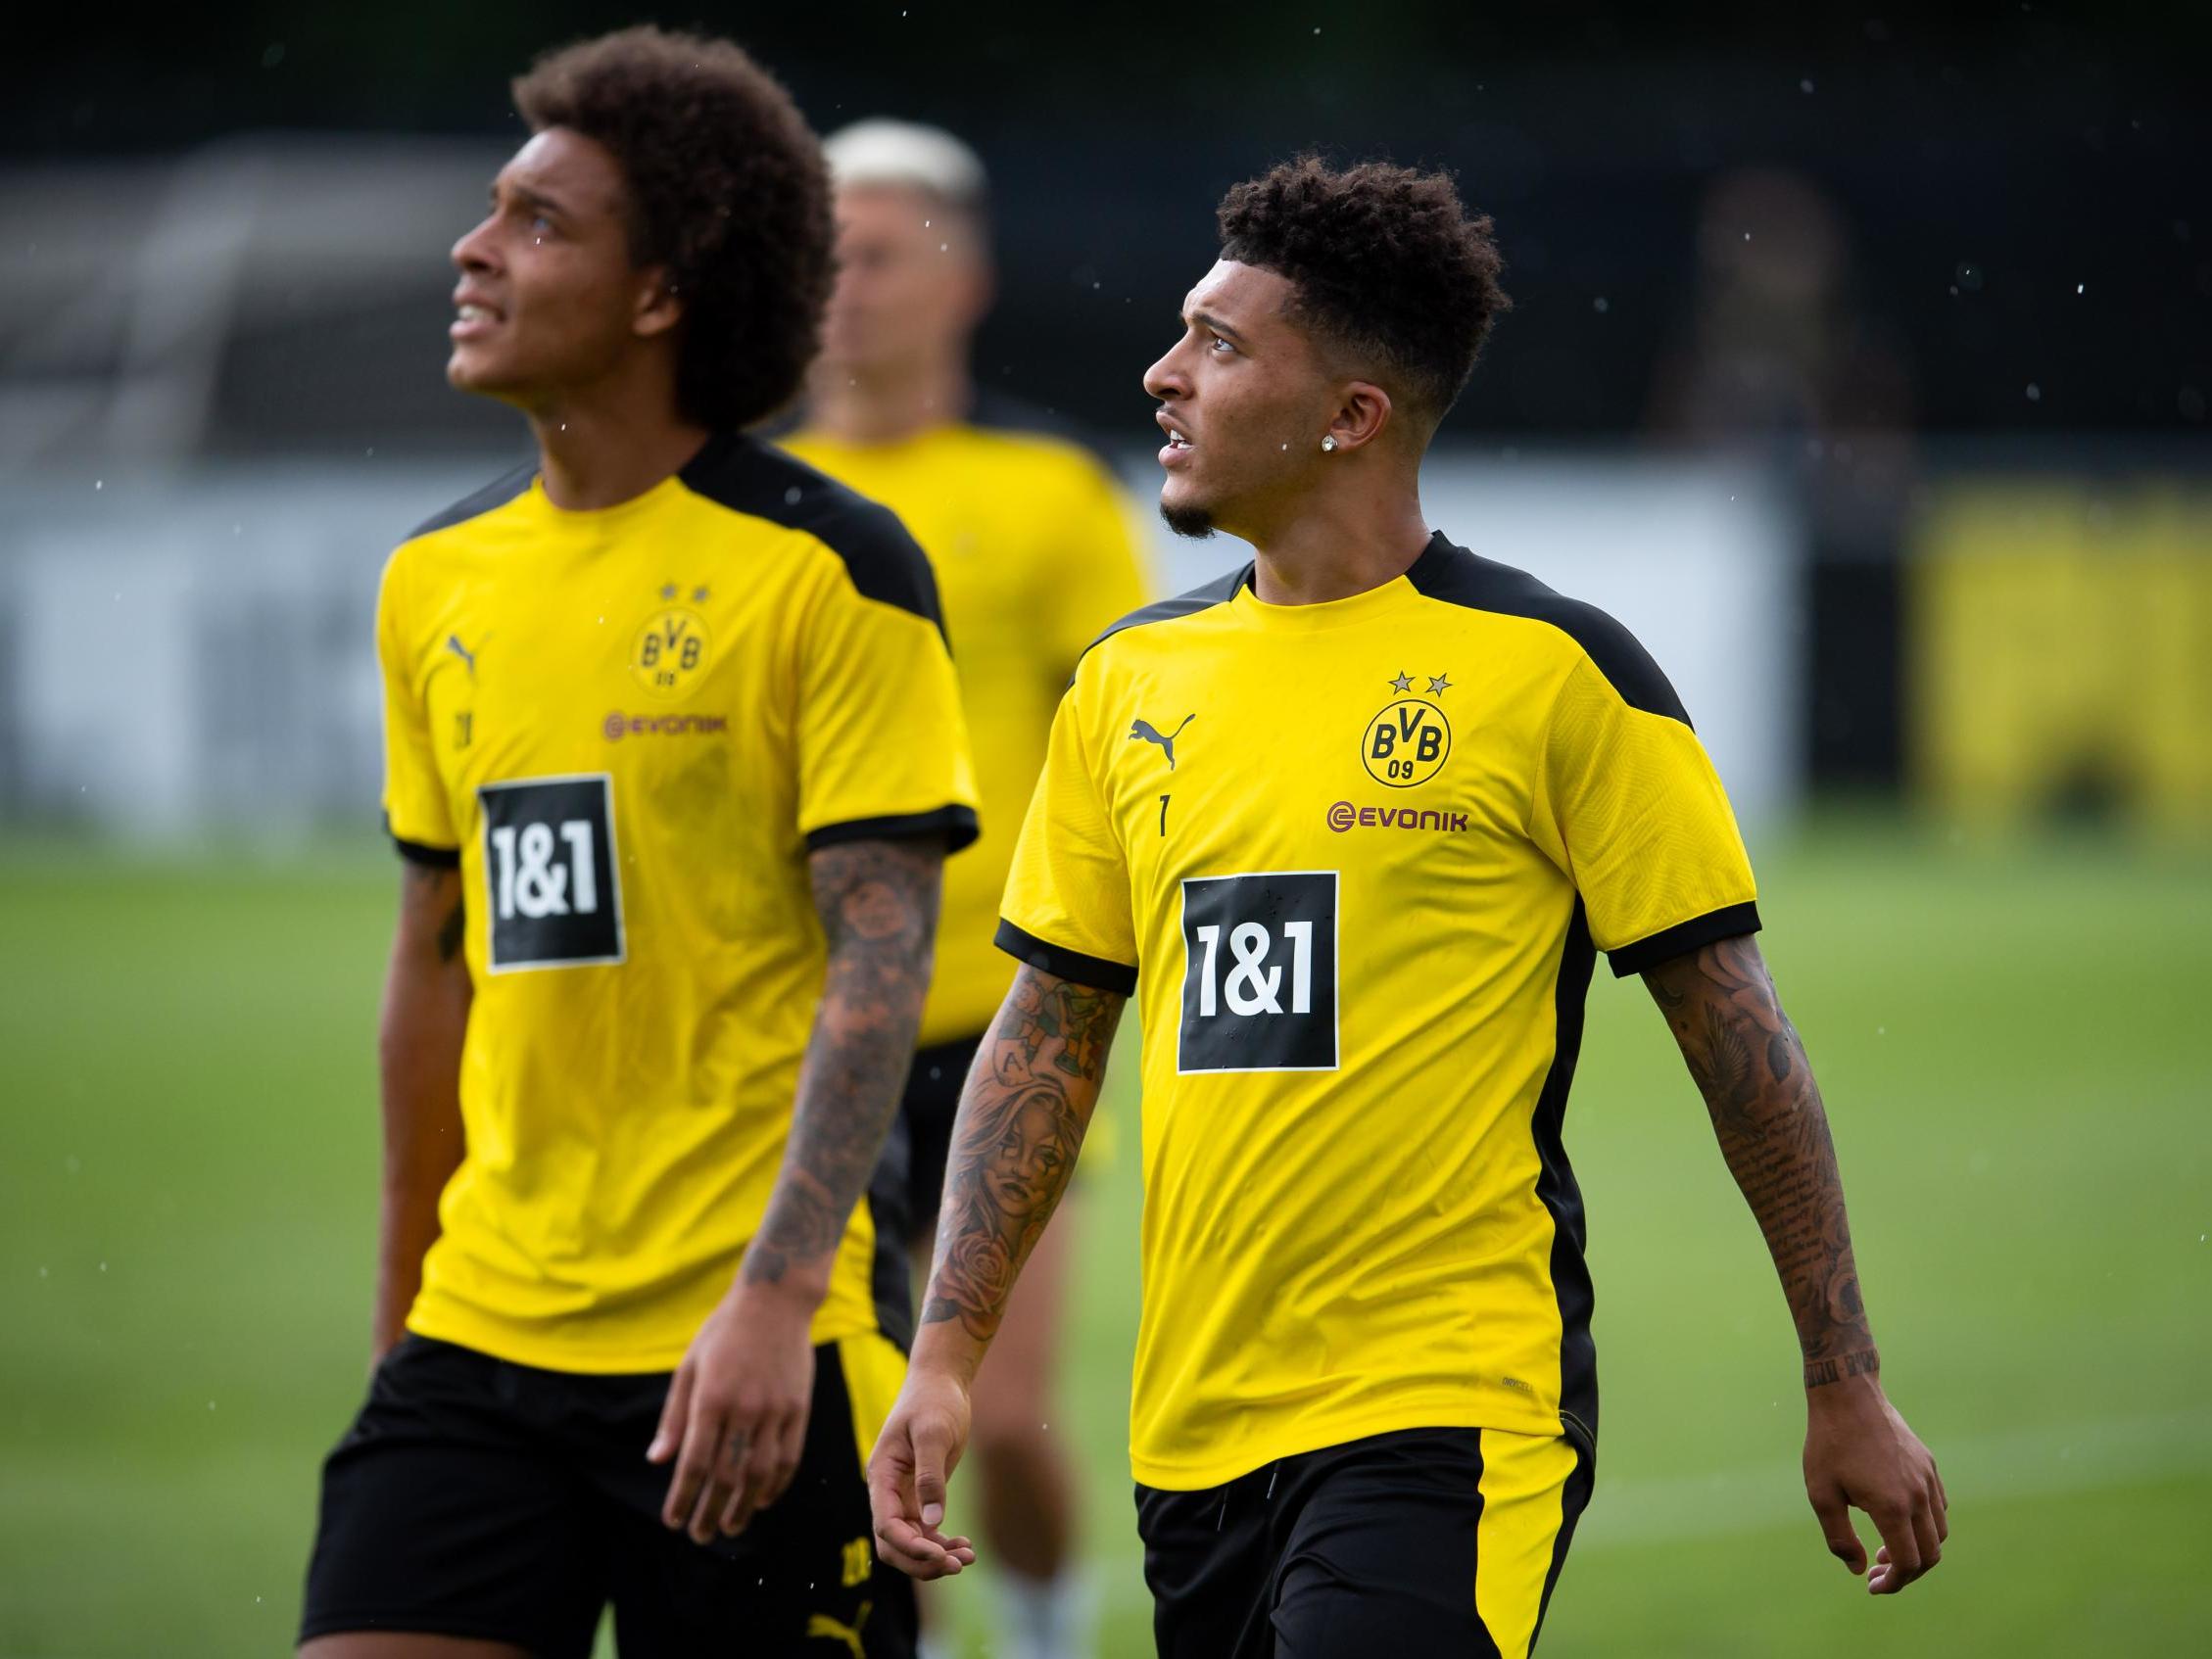 Transfer news LIVE: Jadon Sancho addresses Man United interest, Arsenal offered swap deal and Man City rival Liverpool for Thiago